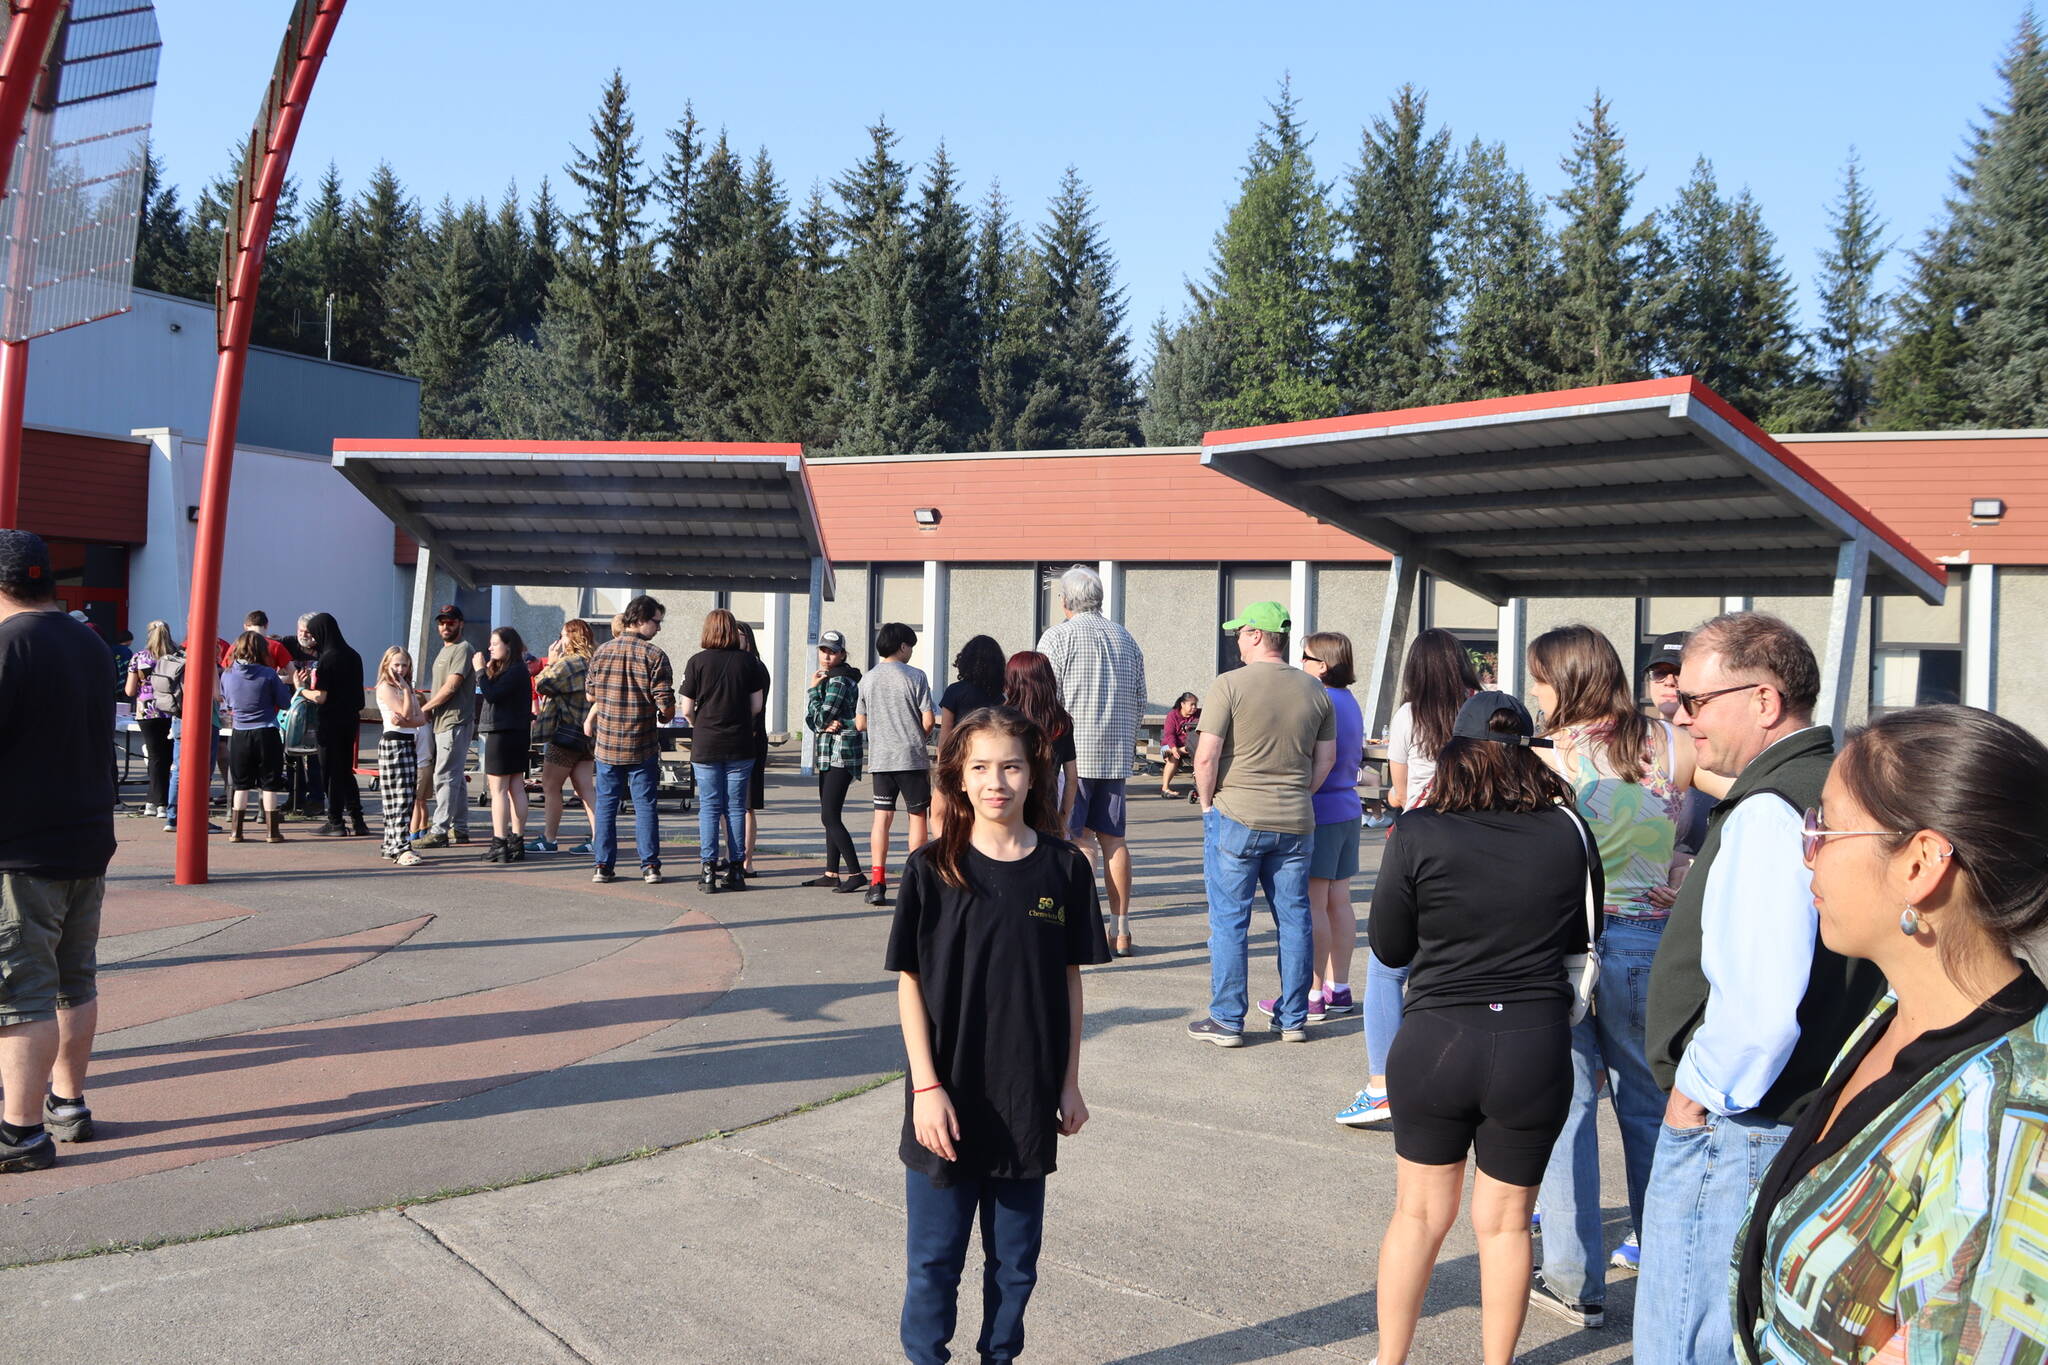 Rosemarie Becker looks toward the parking lot during Floyd Dryden Middle School’s 50th anniversary celebration Wednesday. Her father, Ed Becker, looks on as they wait in the hot dog line. (Meredith Jordan / Juneau Empire)